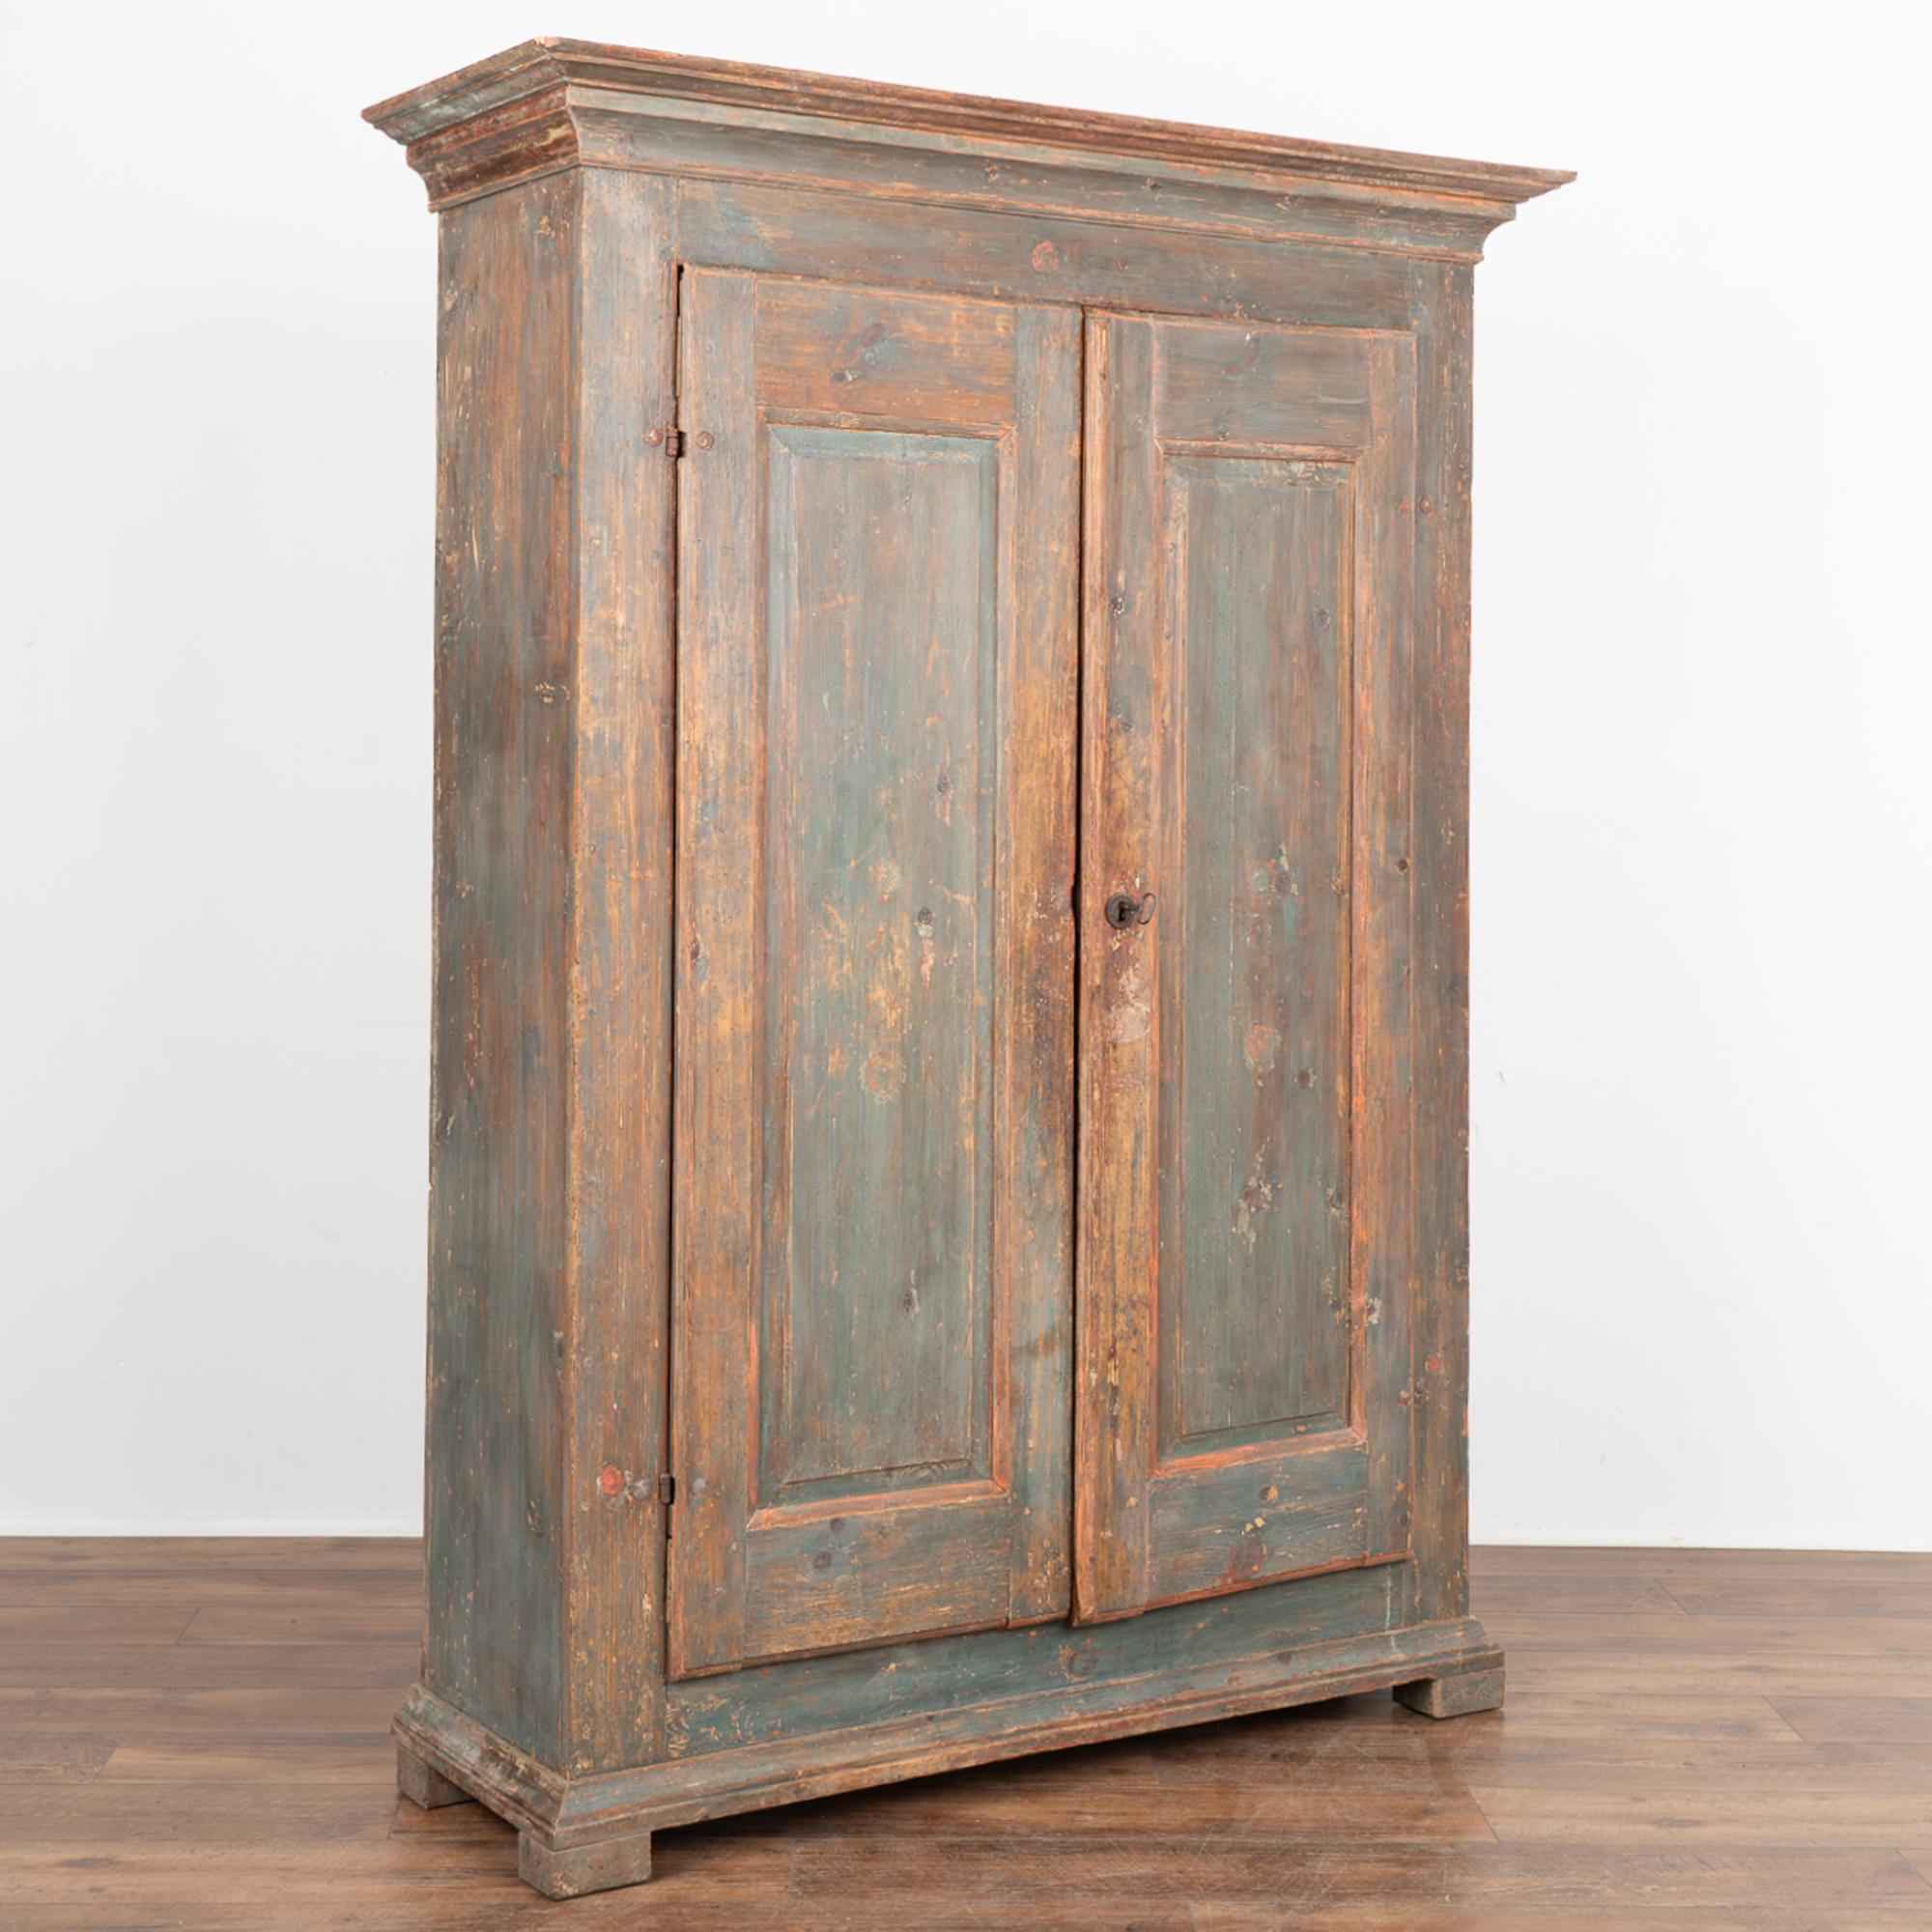 It is the incredible aged patina of the original painted finish that makes this armoire a special find. Look closely and you will see the residual image of red flowers against the faded blue background.
The interior still has the carved wooden pegs